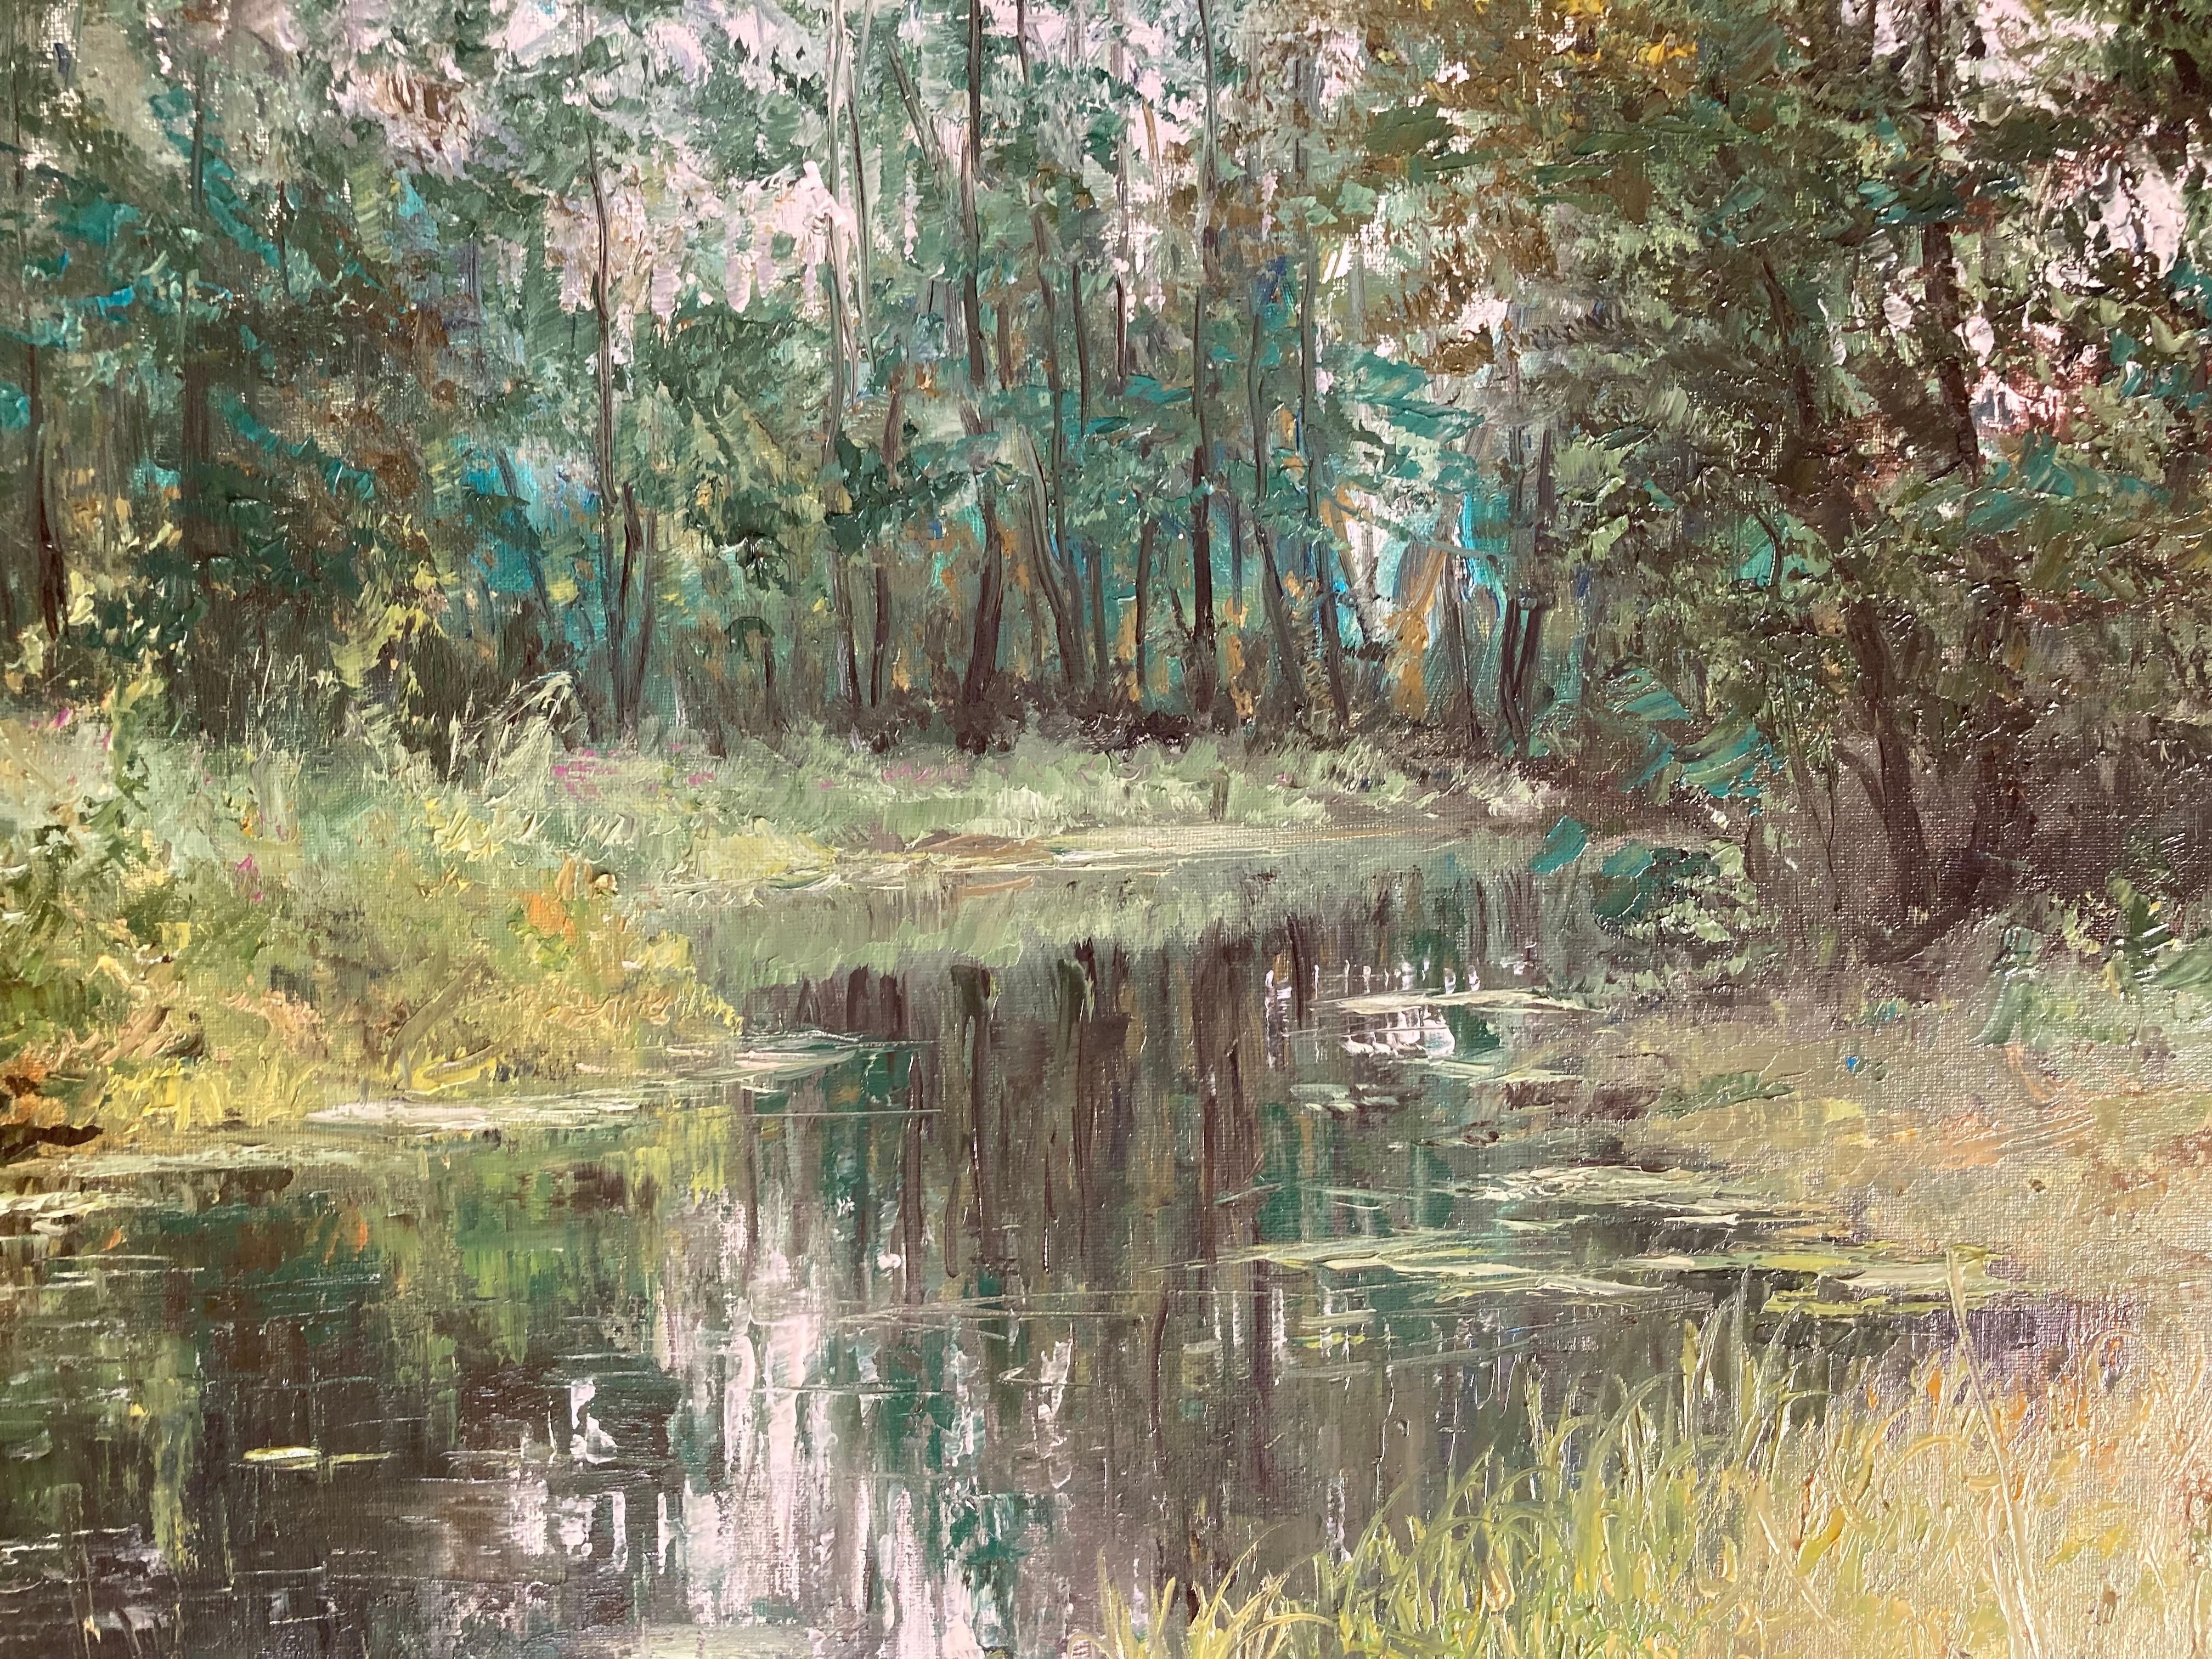 An evocative scene of a pond in a forest by a European artist whose name I cannot make out on the back of the canvas - so I have listed it as 